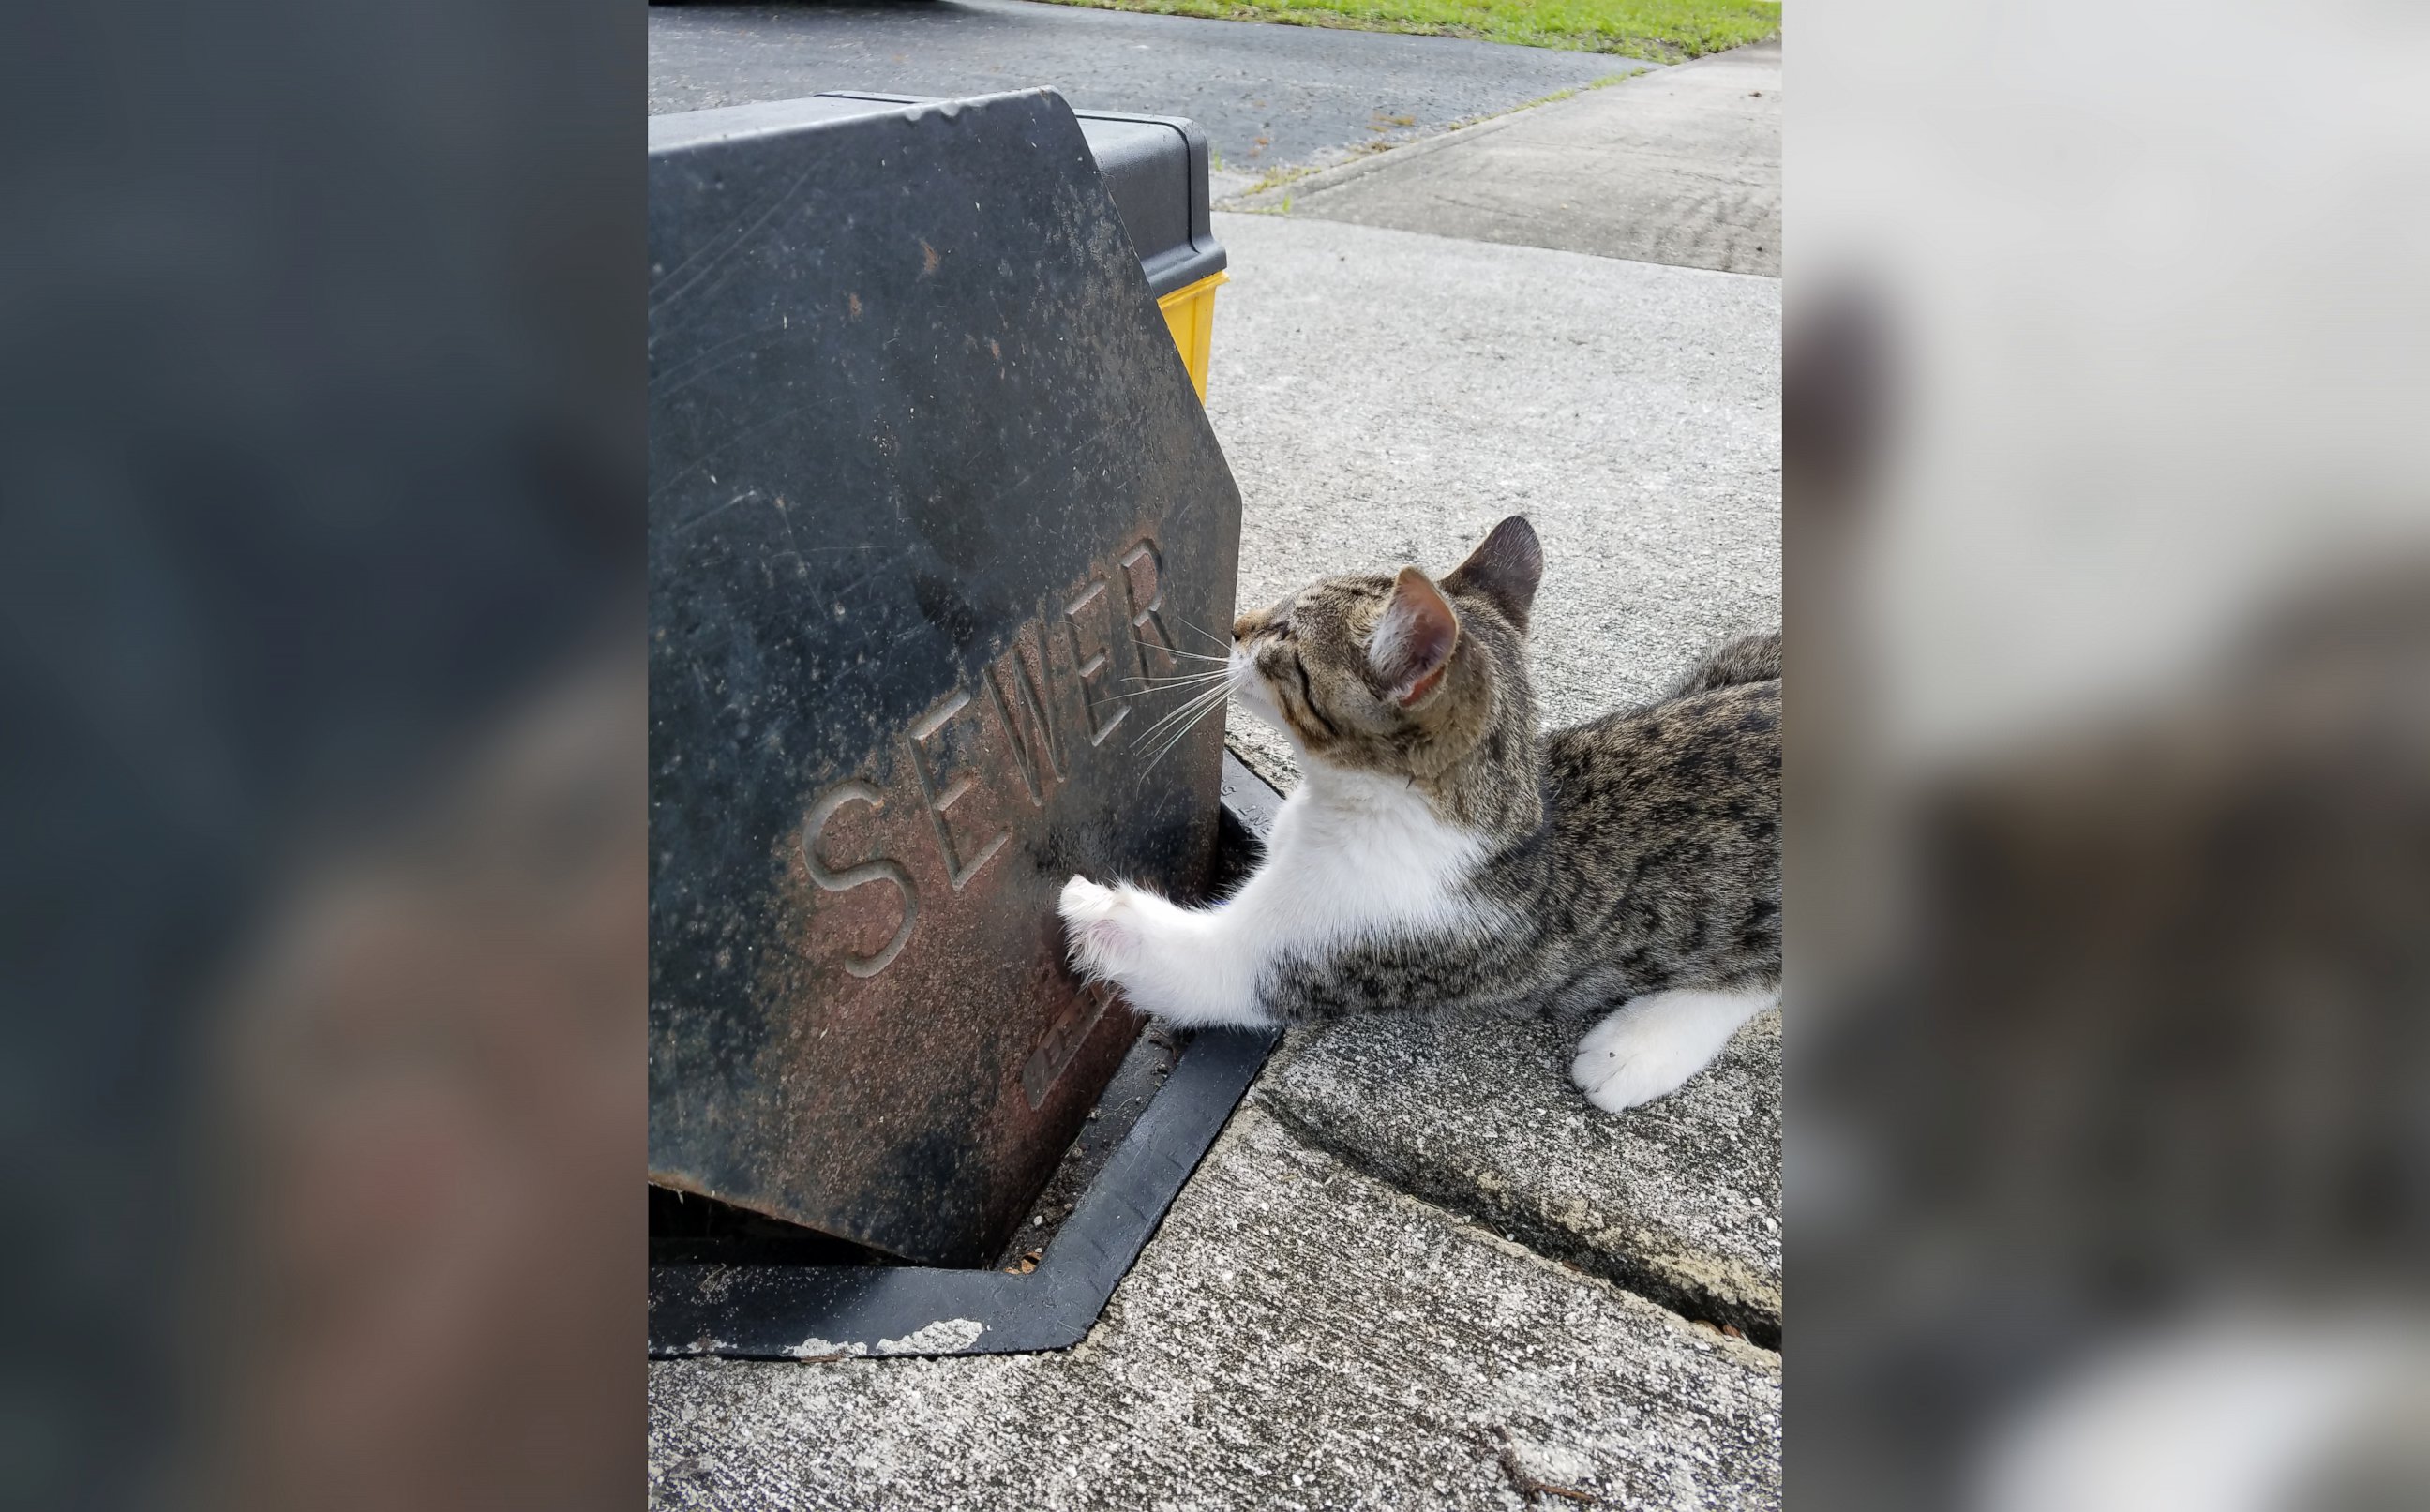 PHOTO: The Broward Sheriff's Office Department of Fire Rescue saved a kitten who had its paw stuck in a sewer grate in Lauderdale Lakes, Florida.